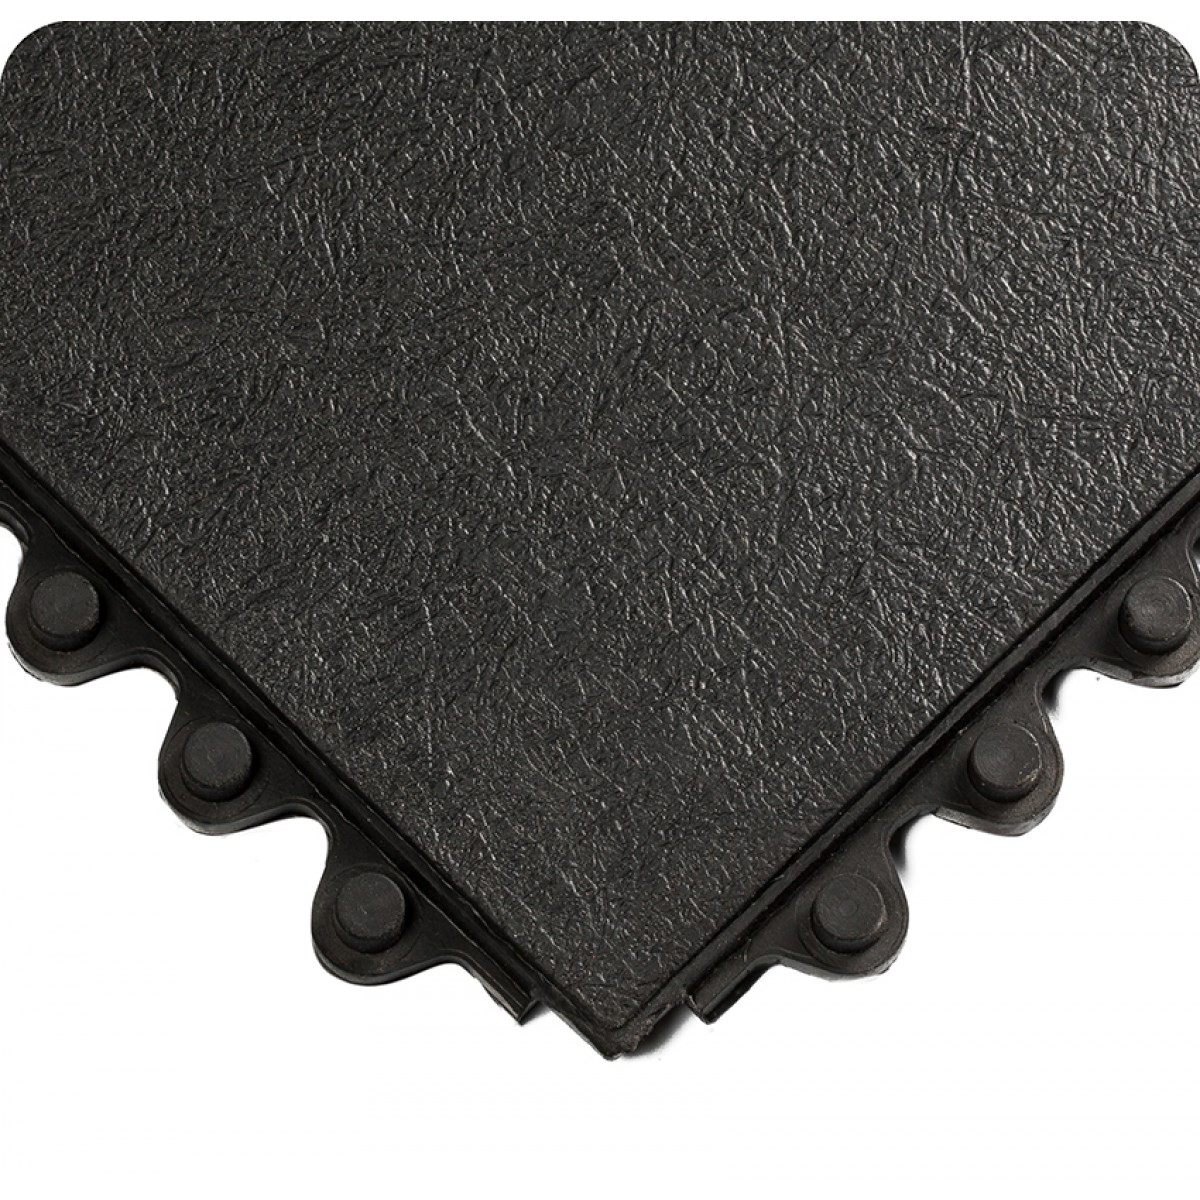 24 7 Solid Grease Resistant Anti Fatigue Mats Mad Matter Inc